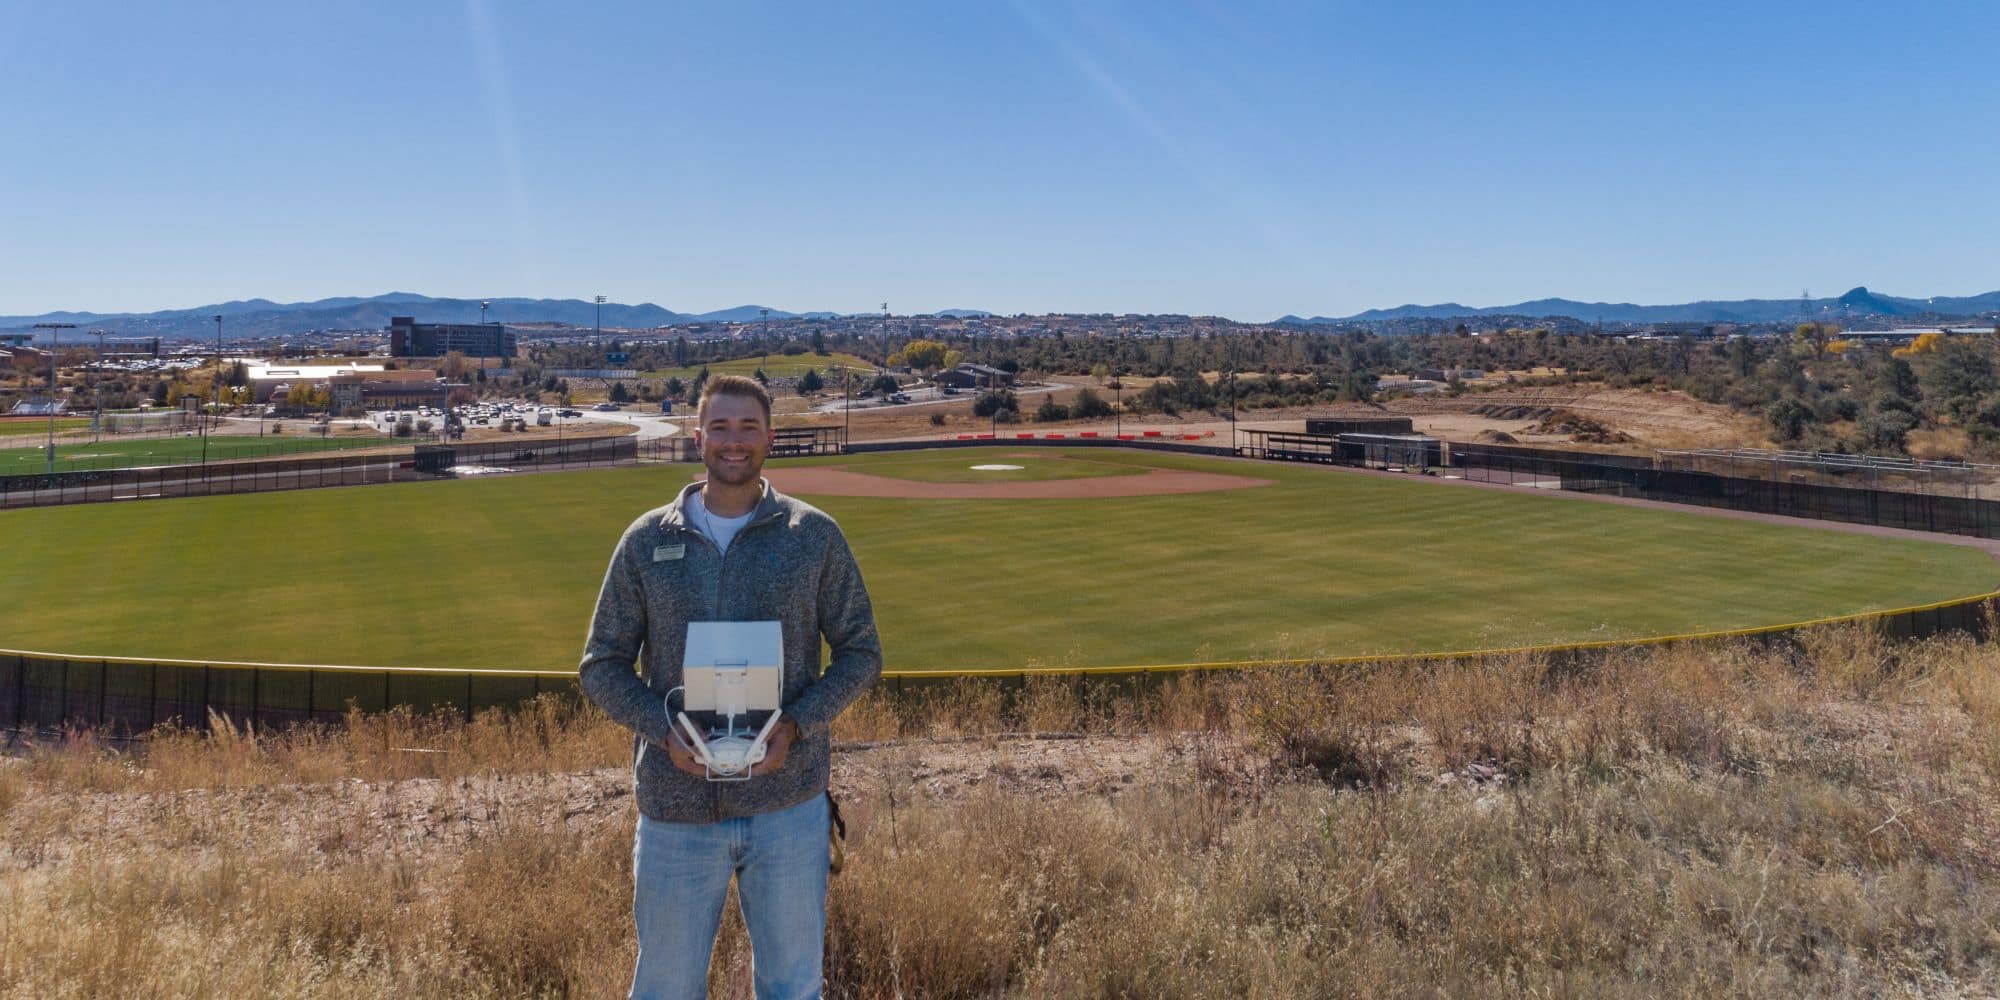 Unmanned Aircraft Systems student Taylor Mantick (’21) utilizes drone photography at the Prescott Campus baseball field.